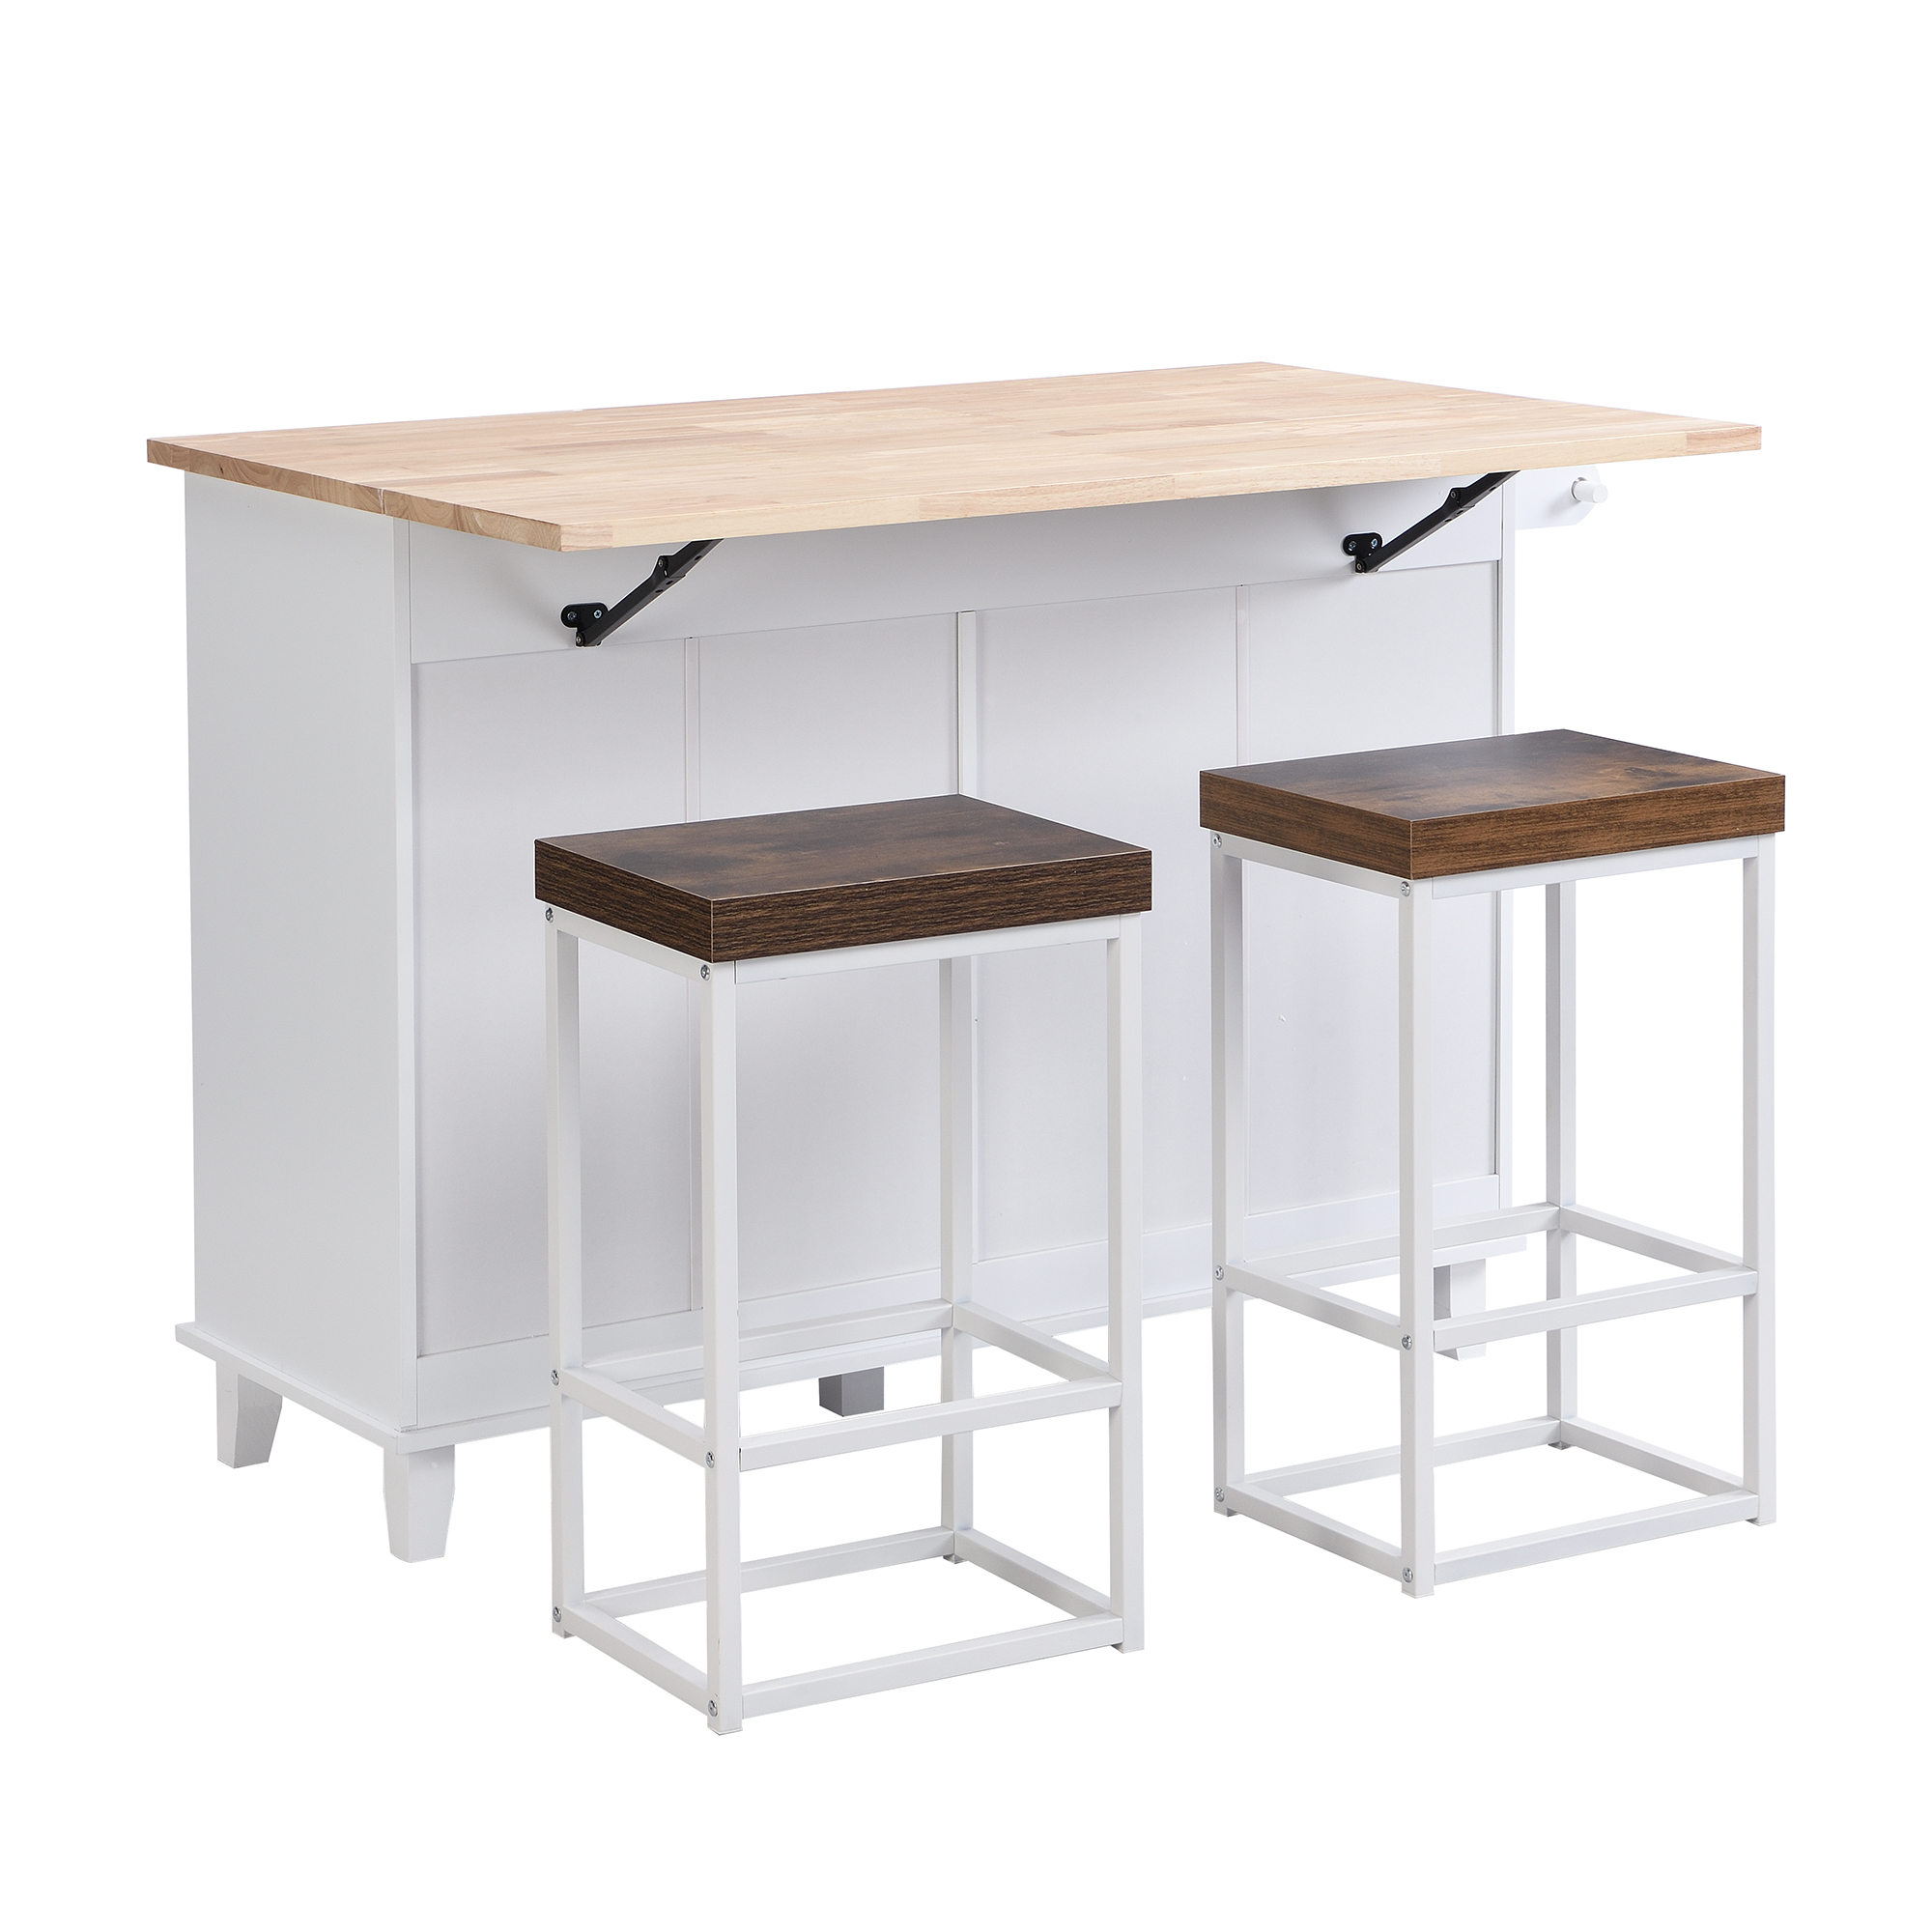 Farmhouse Counter Height Drop Leaf Kitchen Island Set with Stools - SH000234AAK